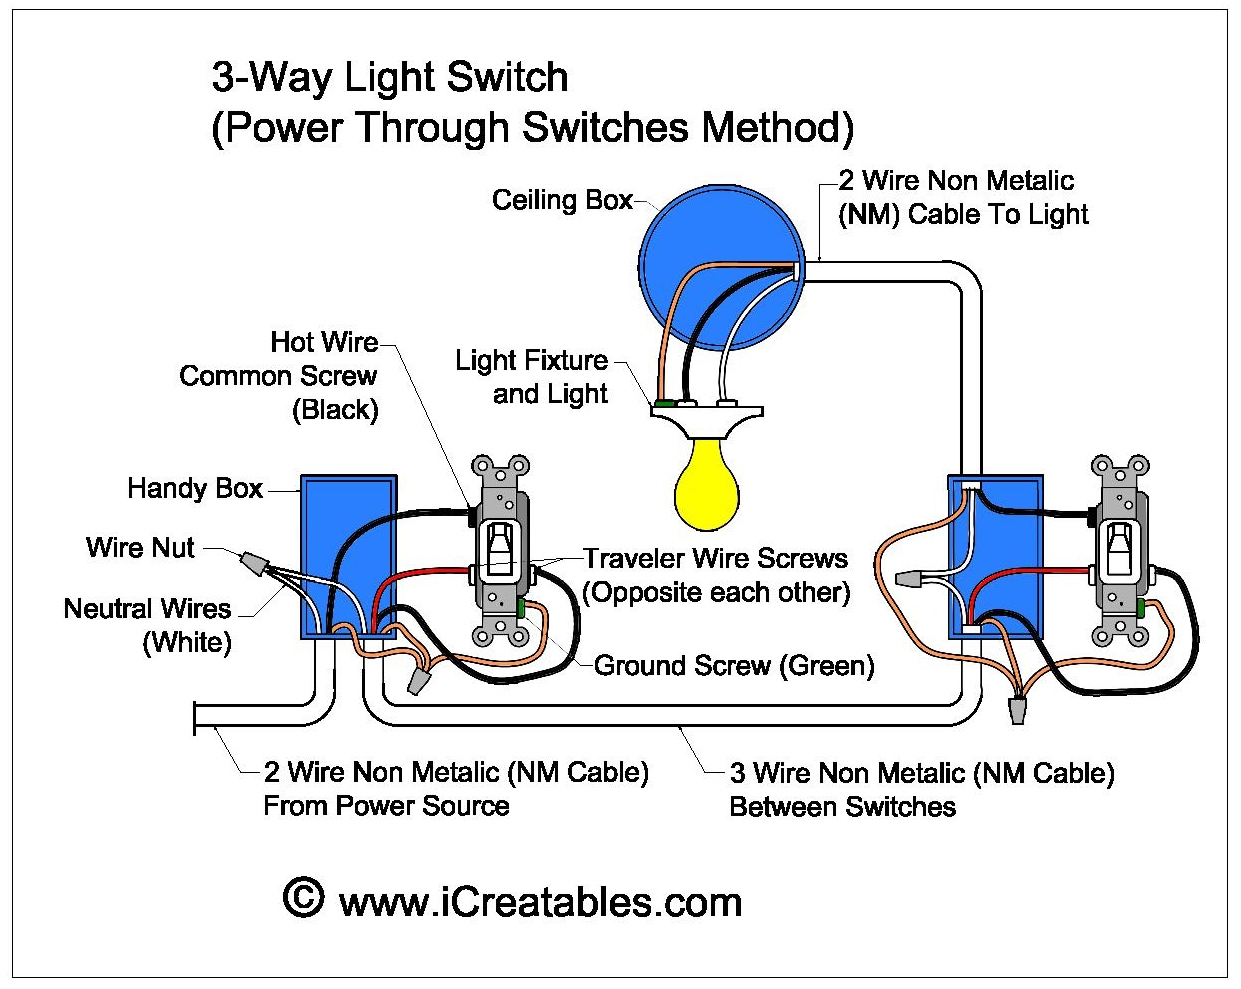 5 Way Light Switch Wiring Diagram from www.icreatables.com